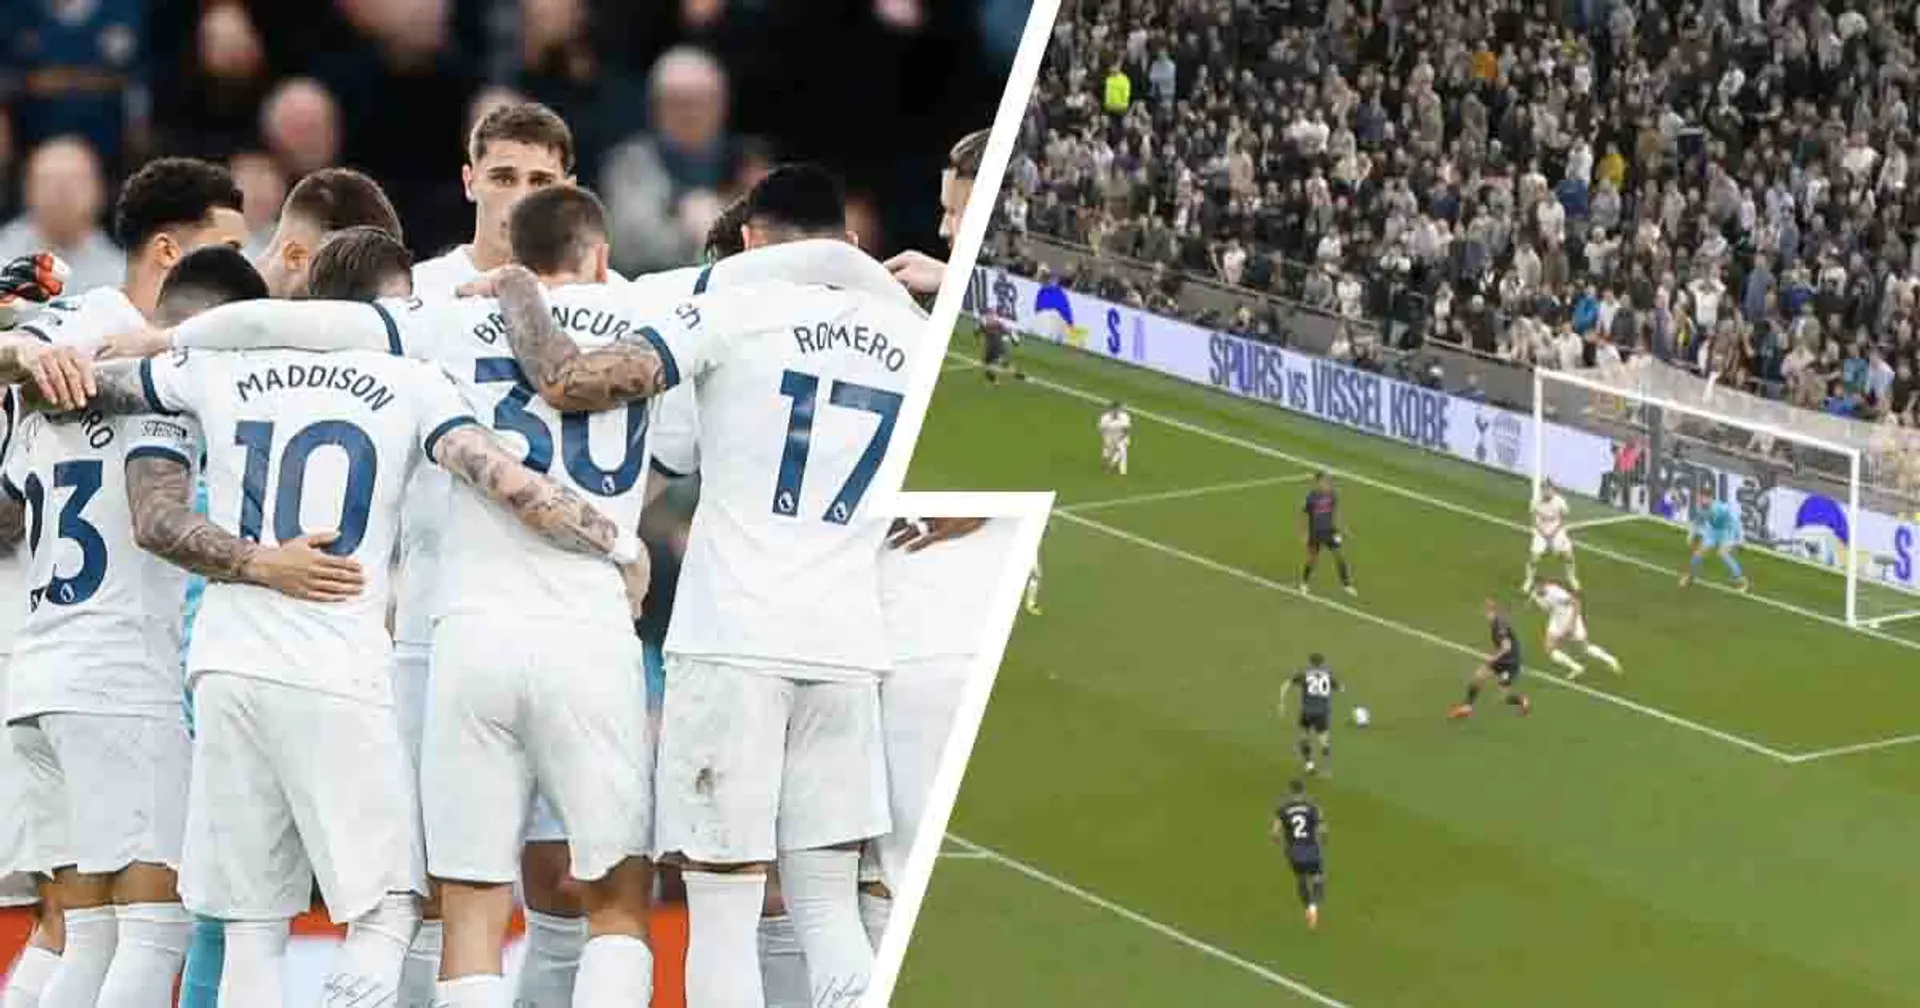 Two Spurs players start trending among Arsenal fans after chaotic first half vs Man City